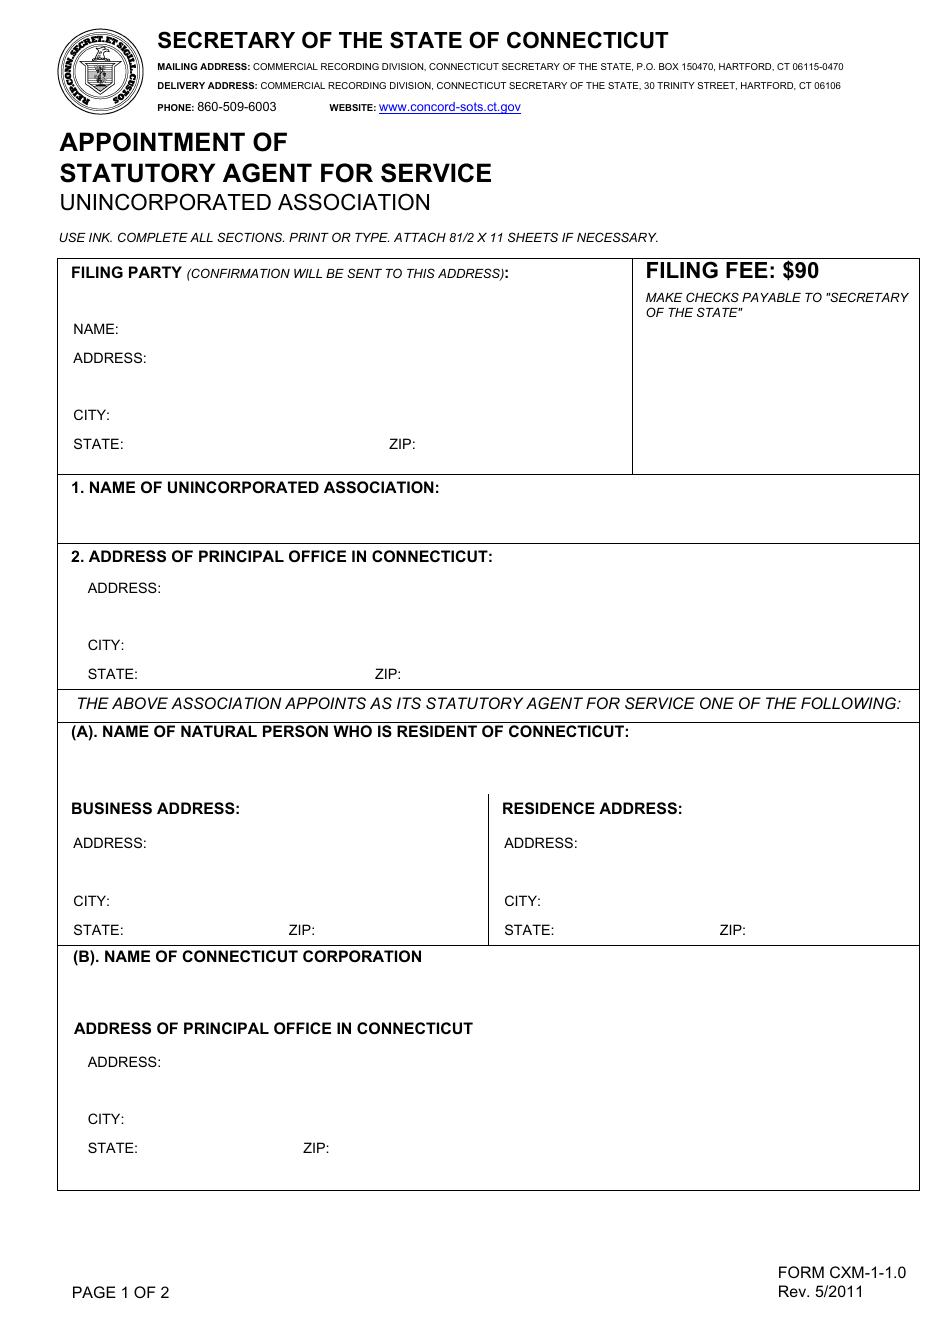 Form CXM-1-1.0 Appointment of Statutory Agent for Service Unincorporated Association - Connecticut, Page 1